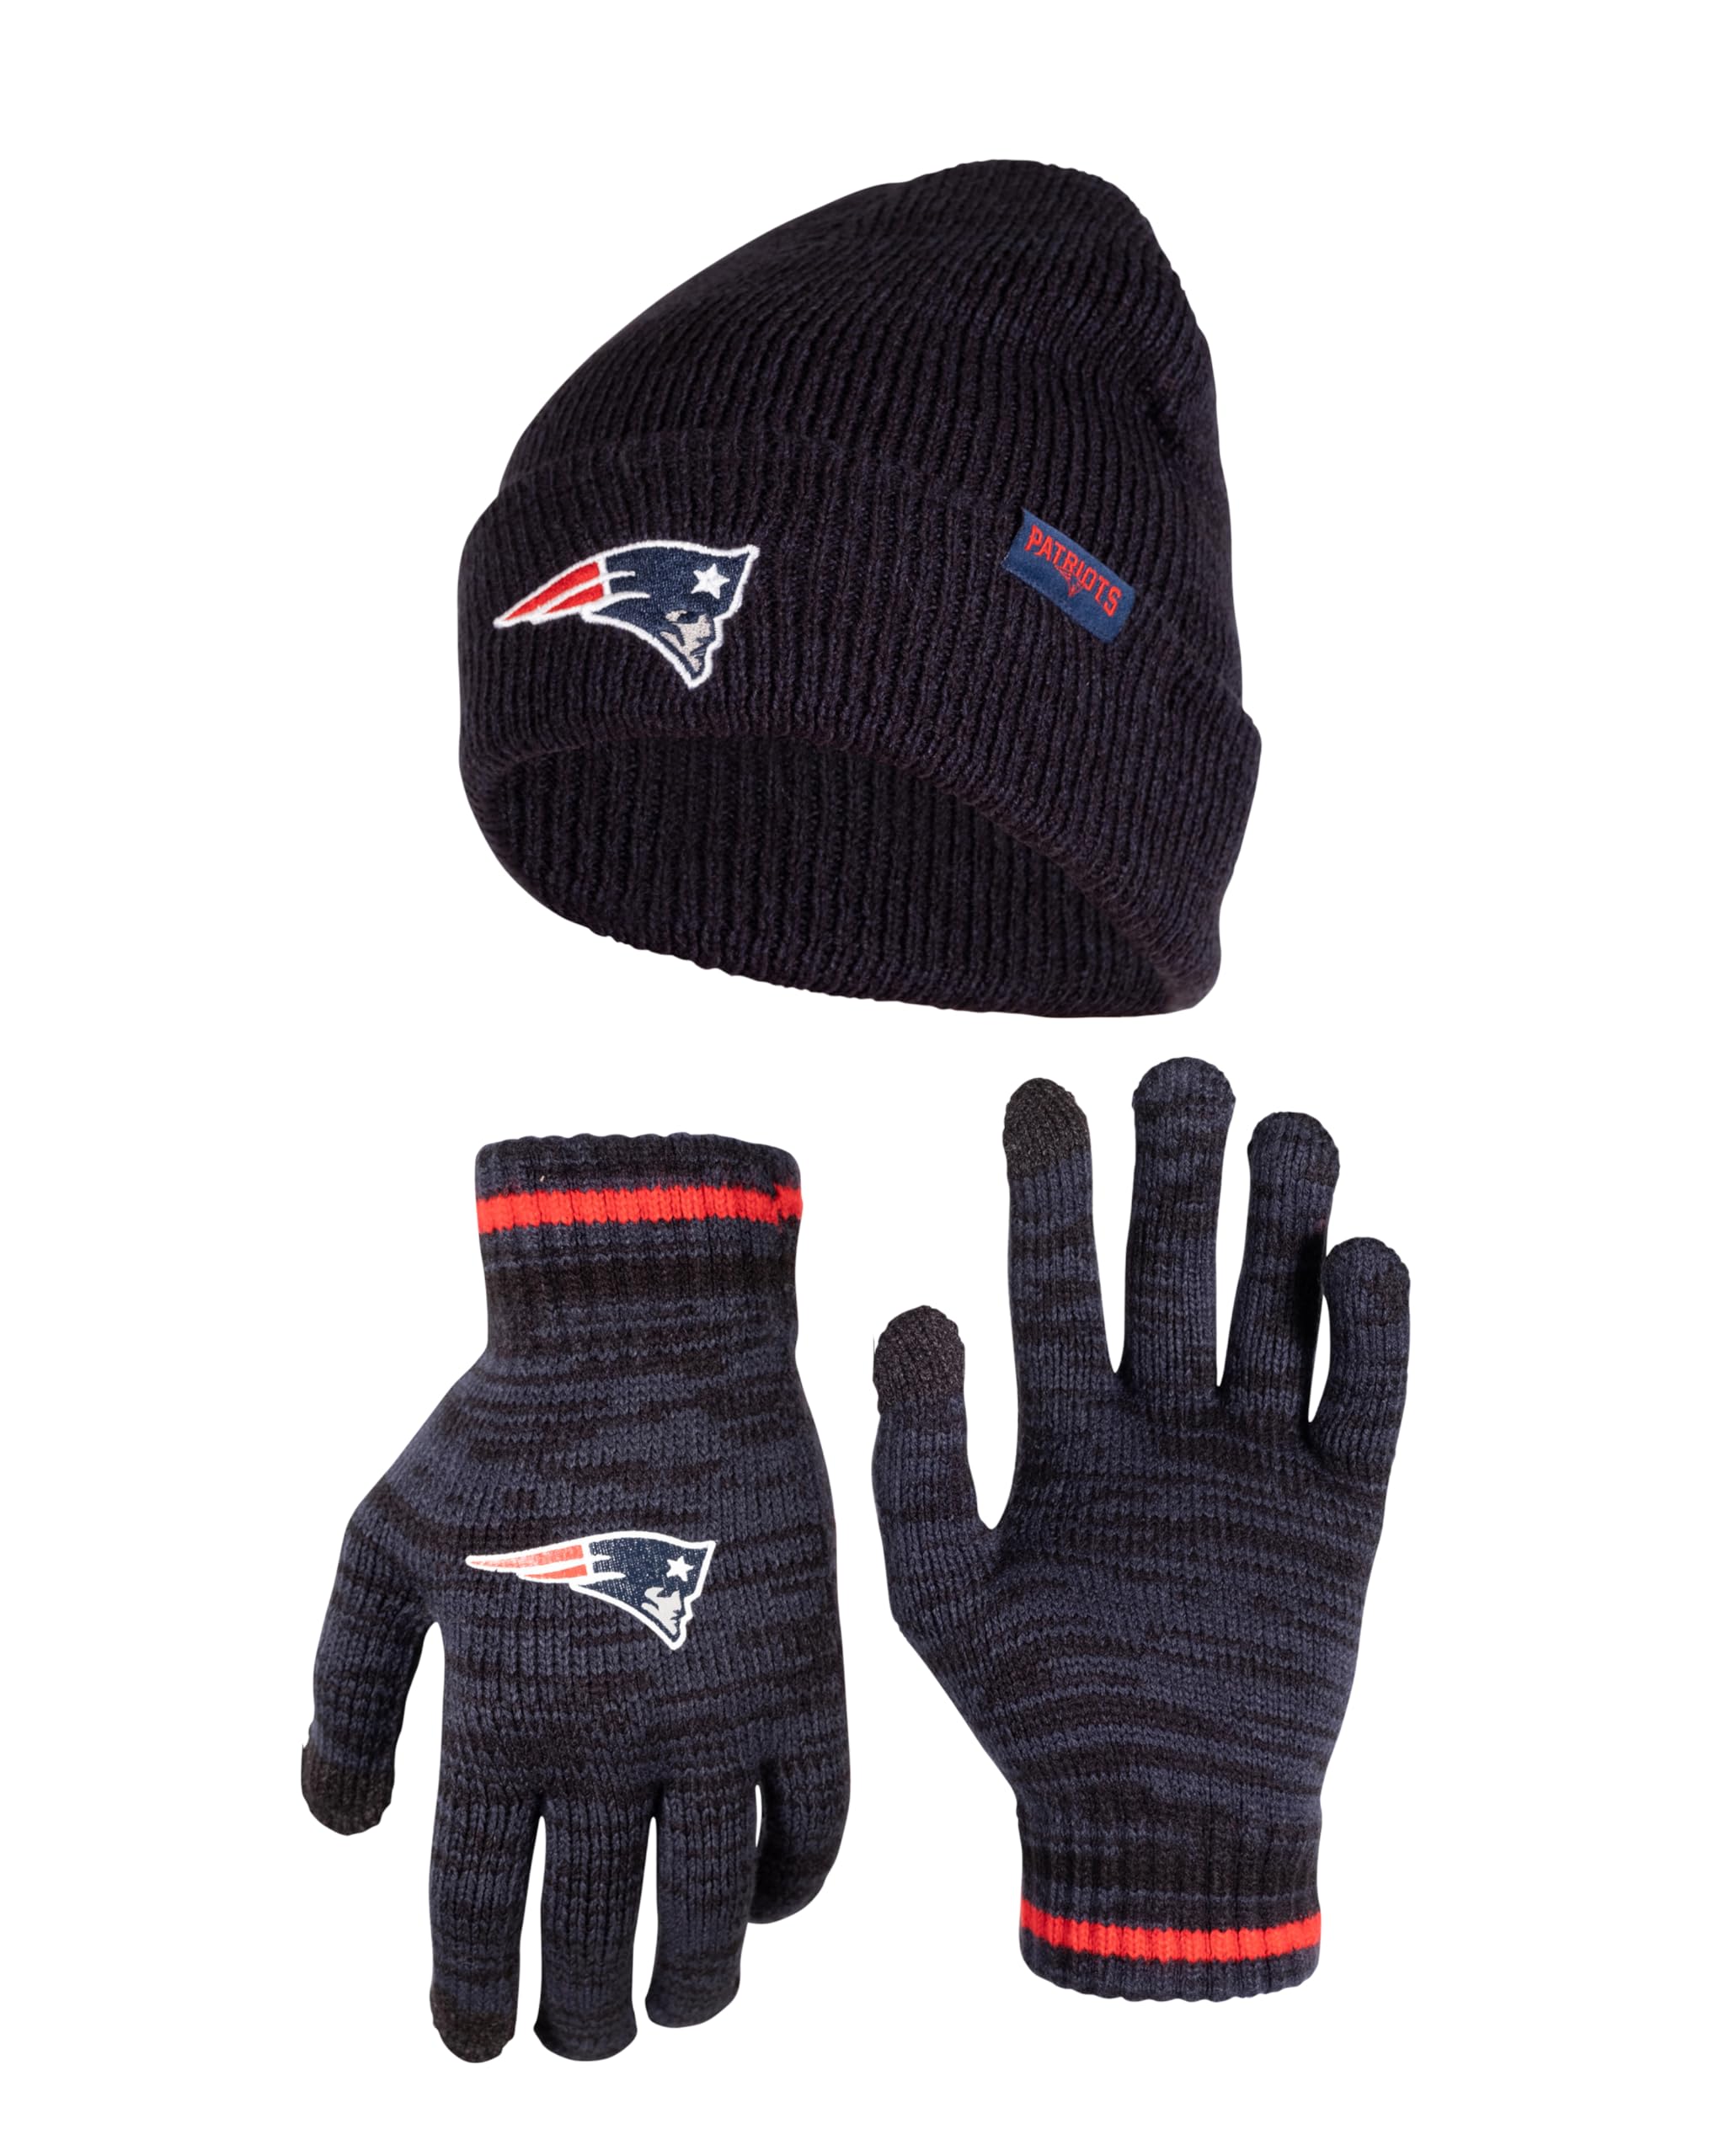 Ultra Game NFL New England Patriots Womens Super Soft Marled Winter Beanie Knit Hat with Extra Warm Touch Screen Gloves|New England Patriots - UltraGameShop